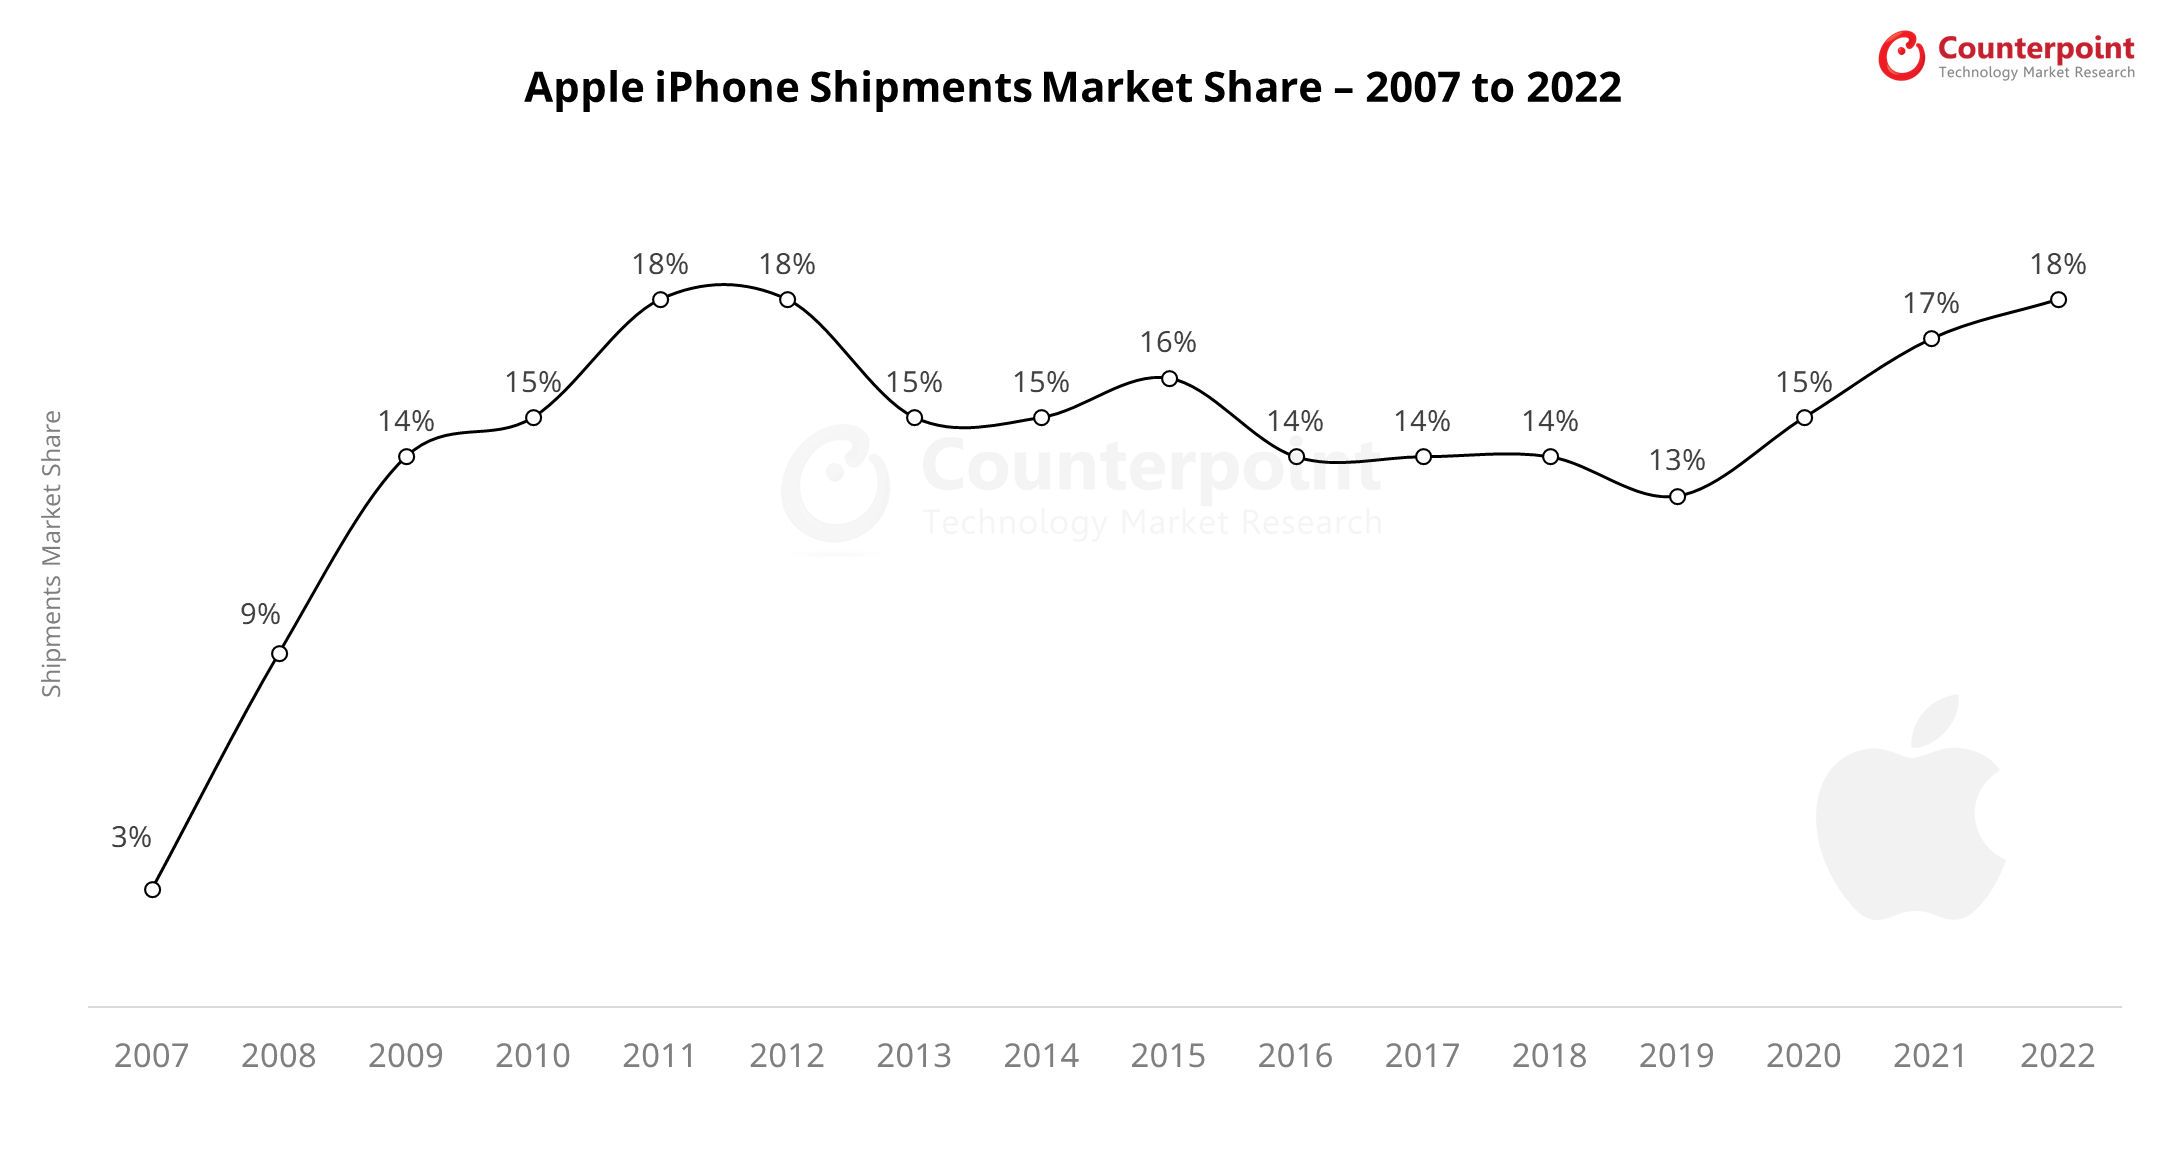 Counterpoint Apple iPhone Shipments Market Share 2022